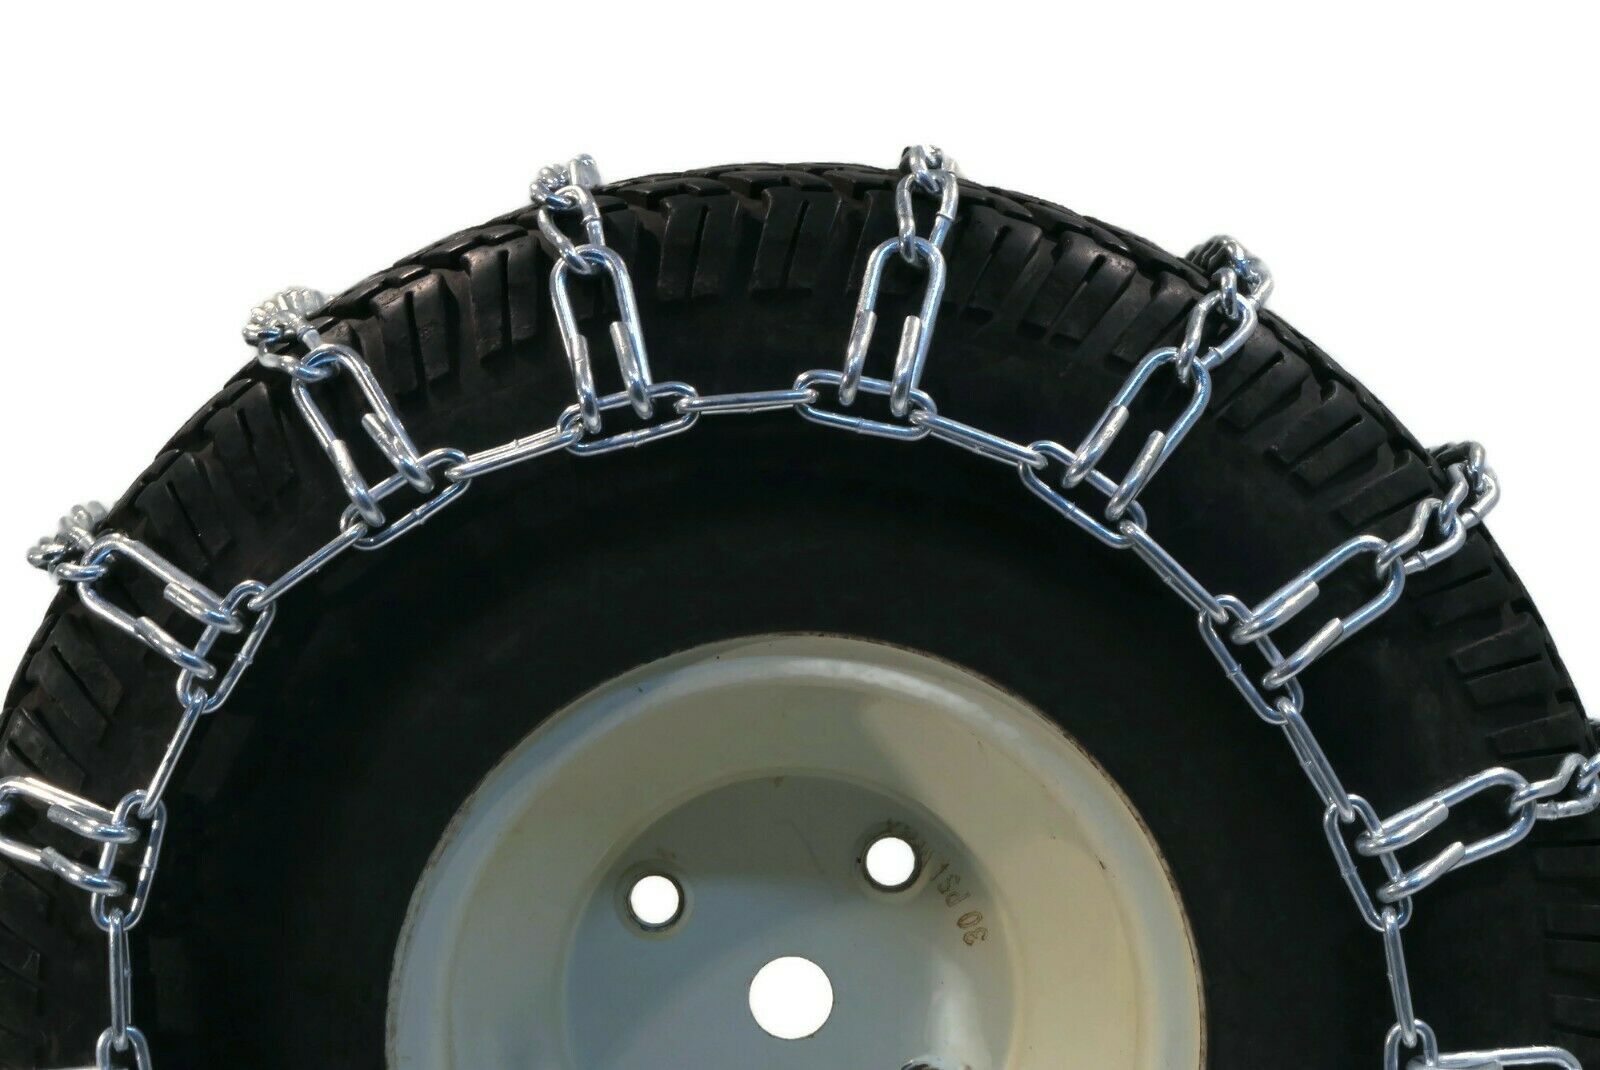 The ROP Shop | Pair 2 Link Tire Chains 16x6.50x8 For John Deere Lawn Mower Tractor Rider - image 4 of 6